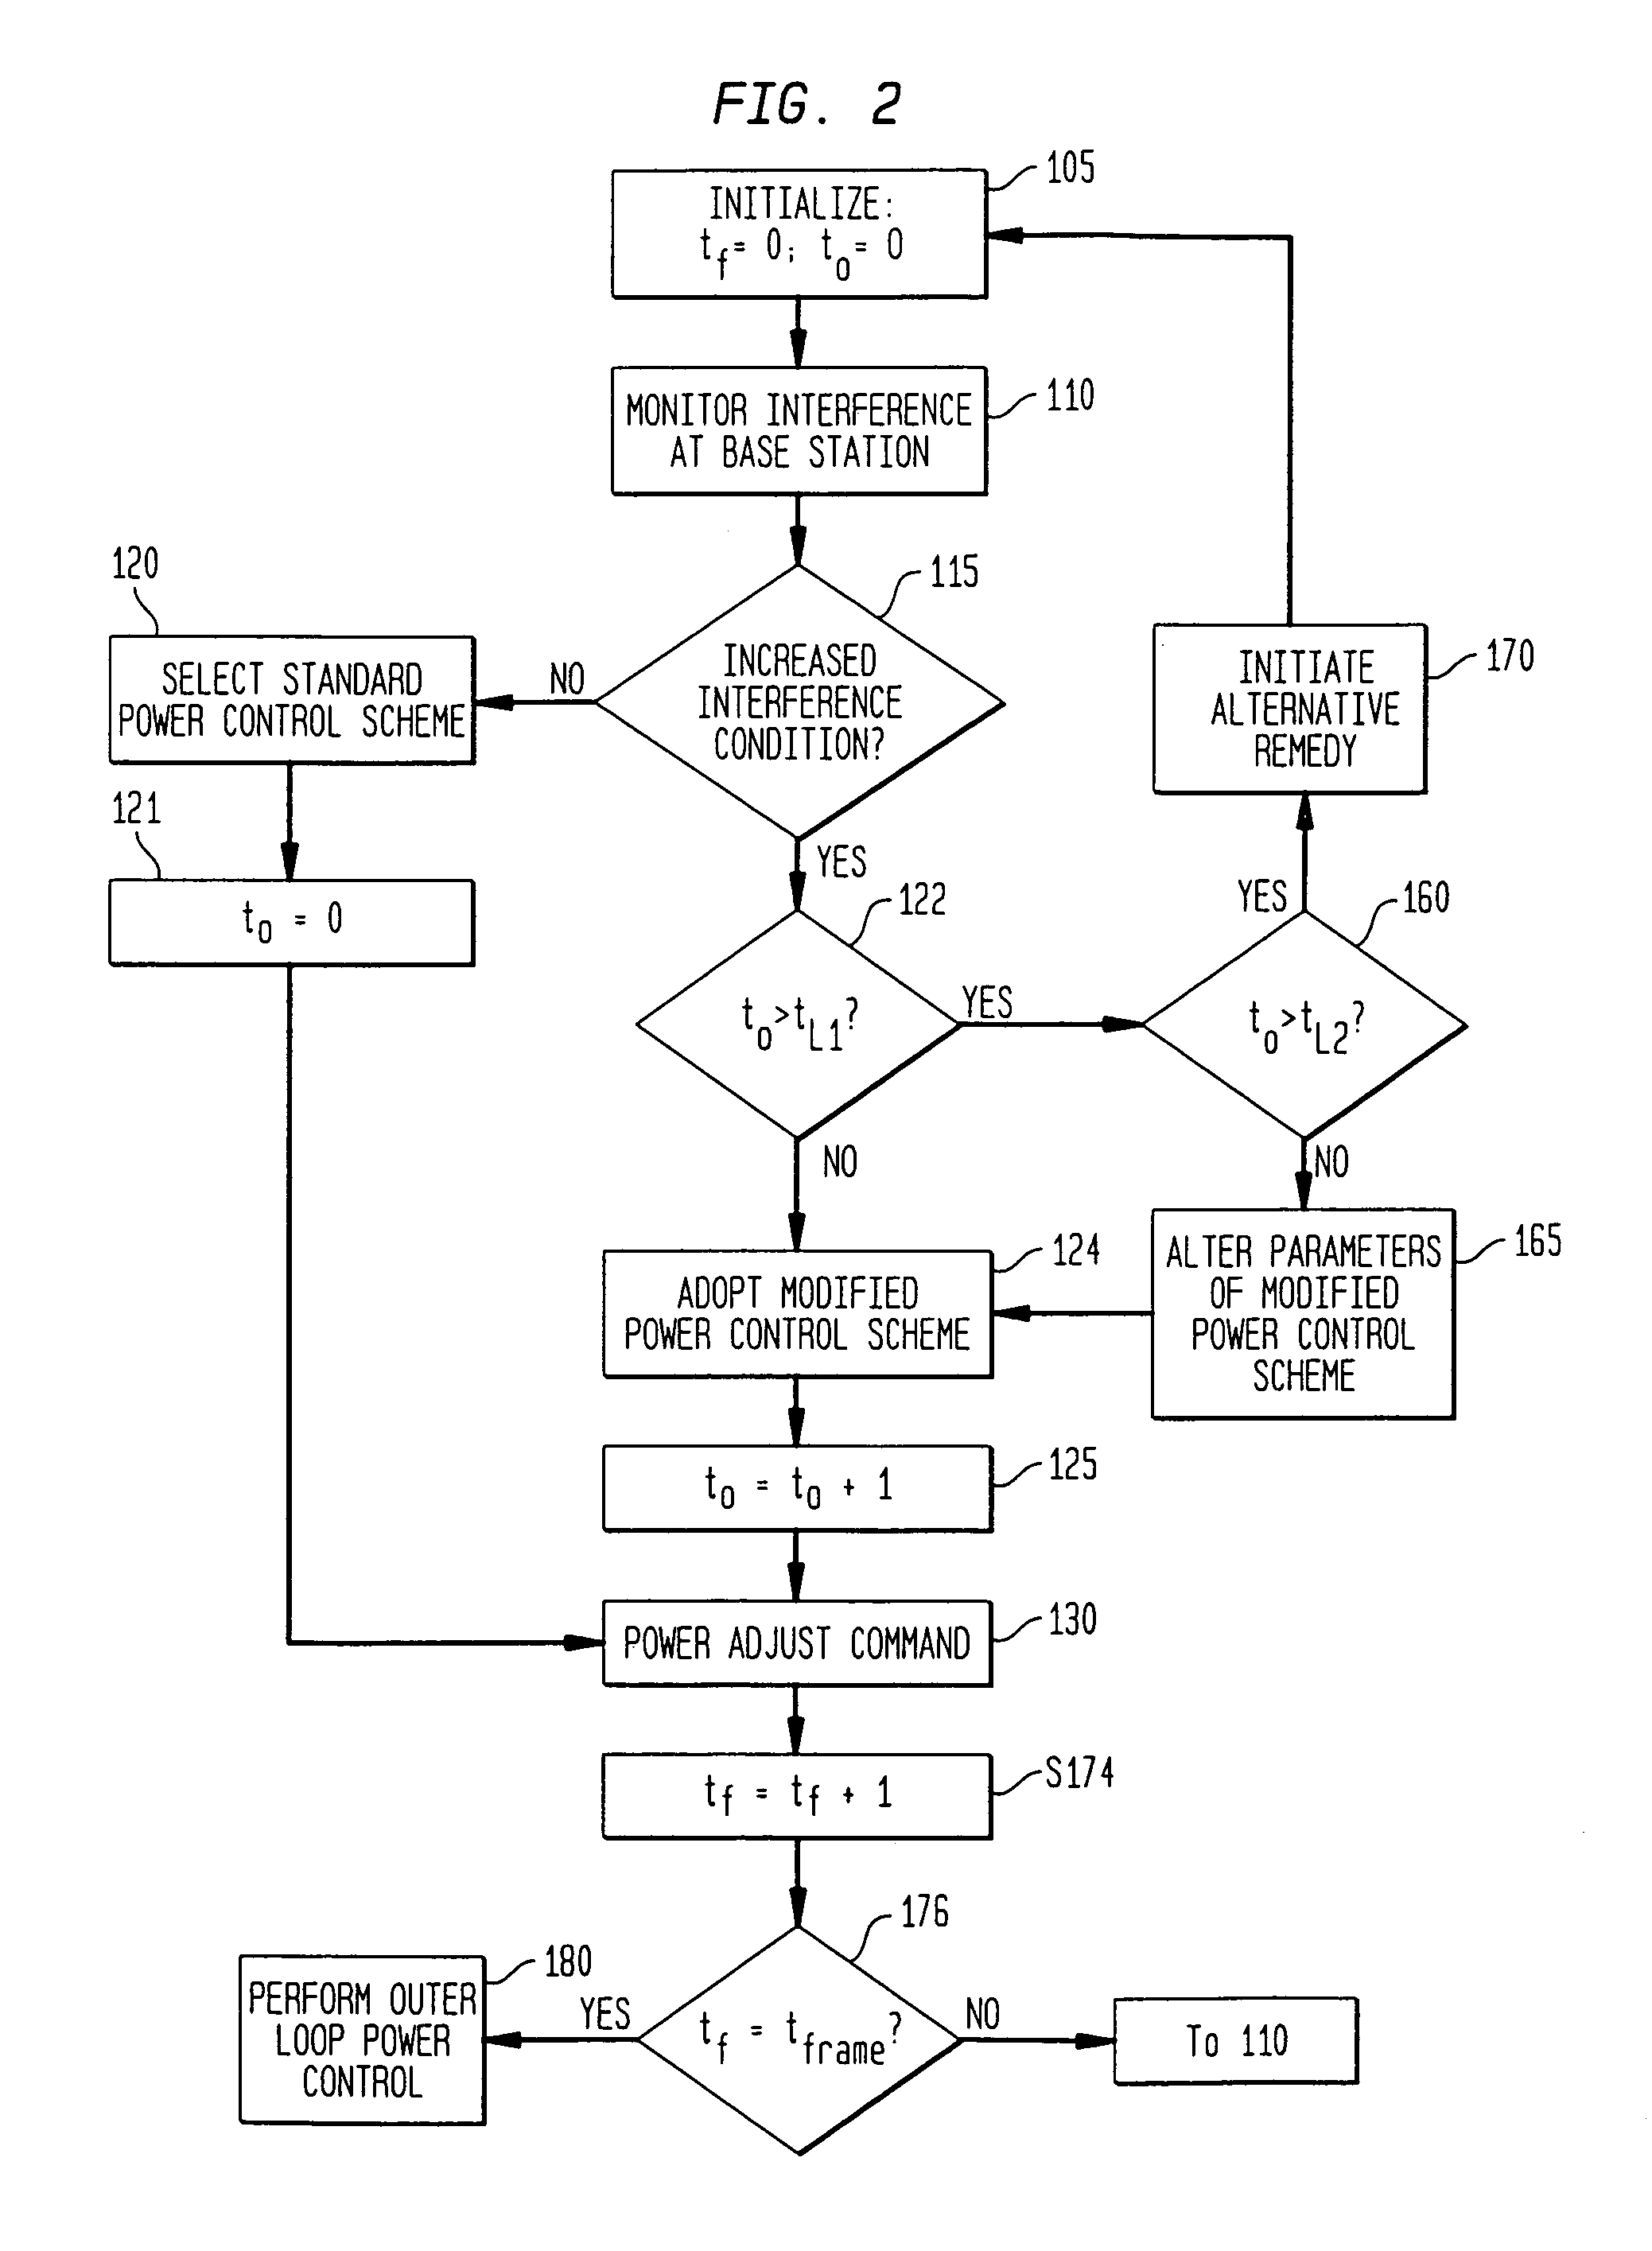 Method and apparatus for controlling reverse link interference rise and power control instability in a wireless system